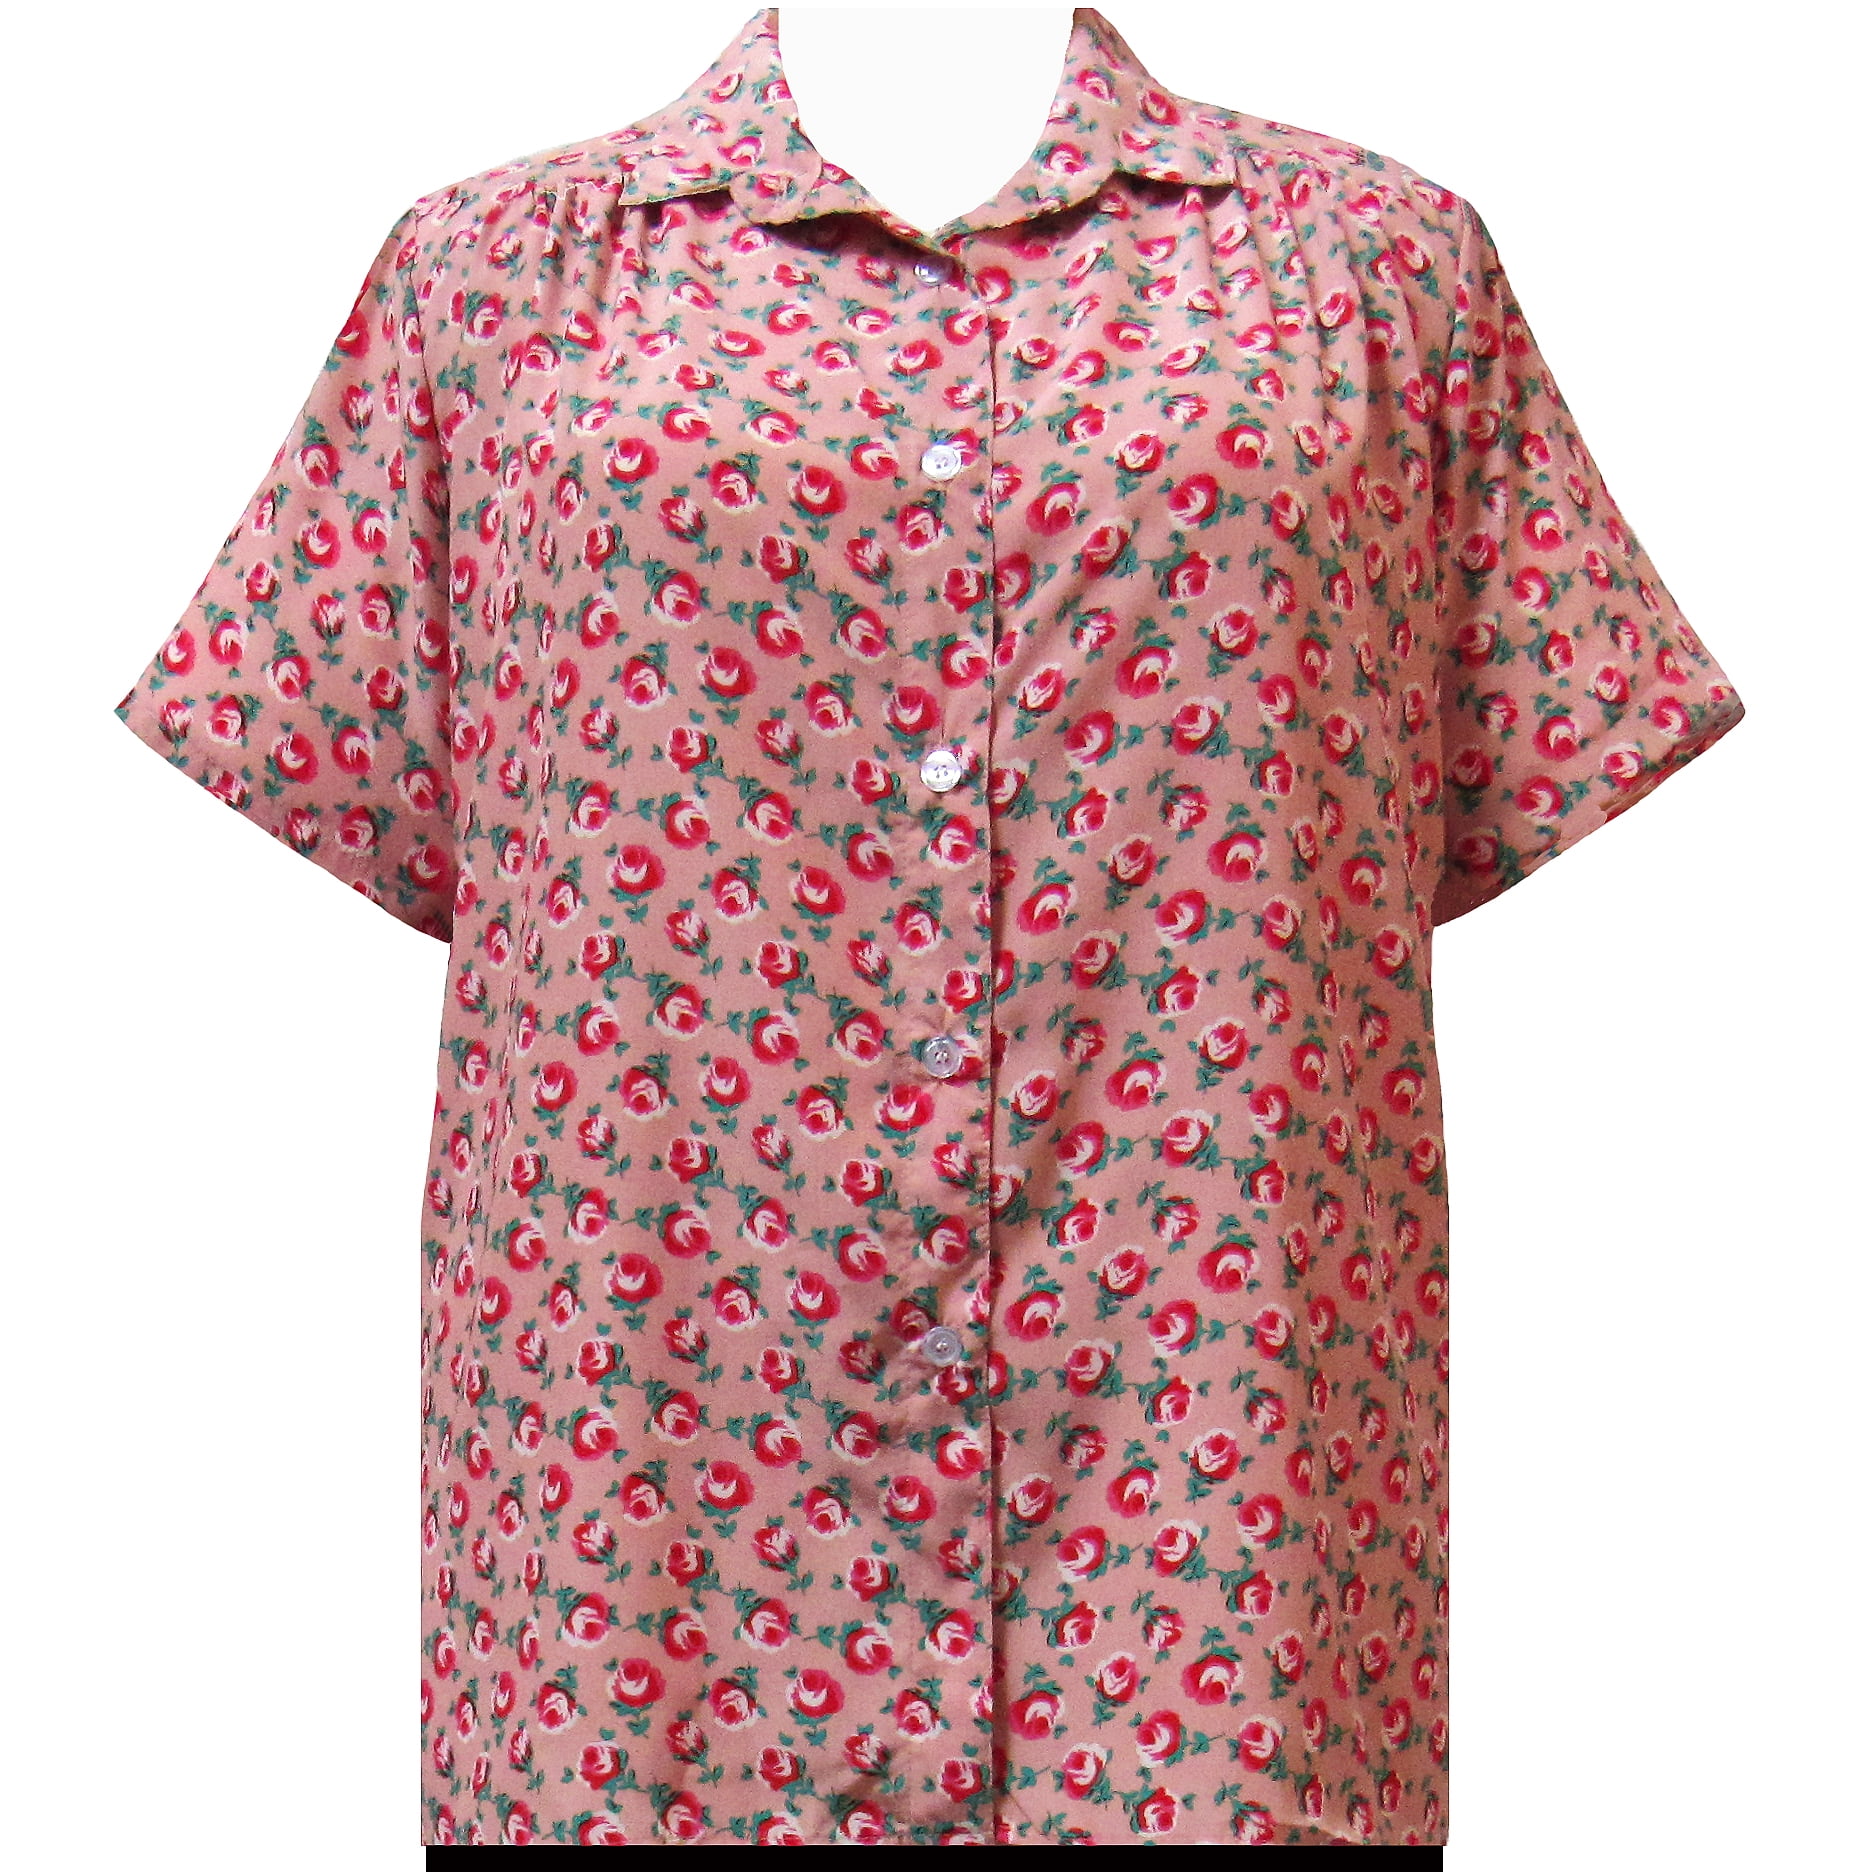 A Personal Touch Women's Plus Size Short Sleeve Button-Up Print Blouse ...